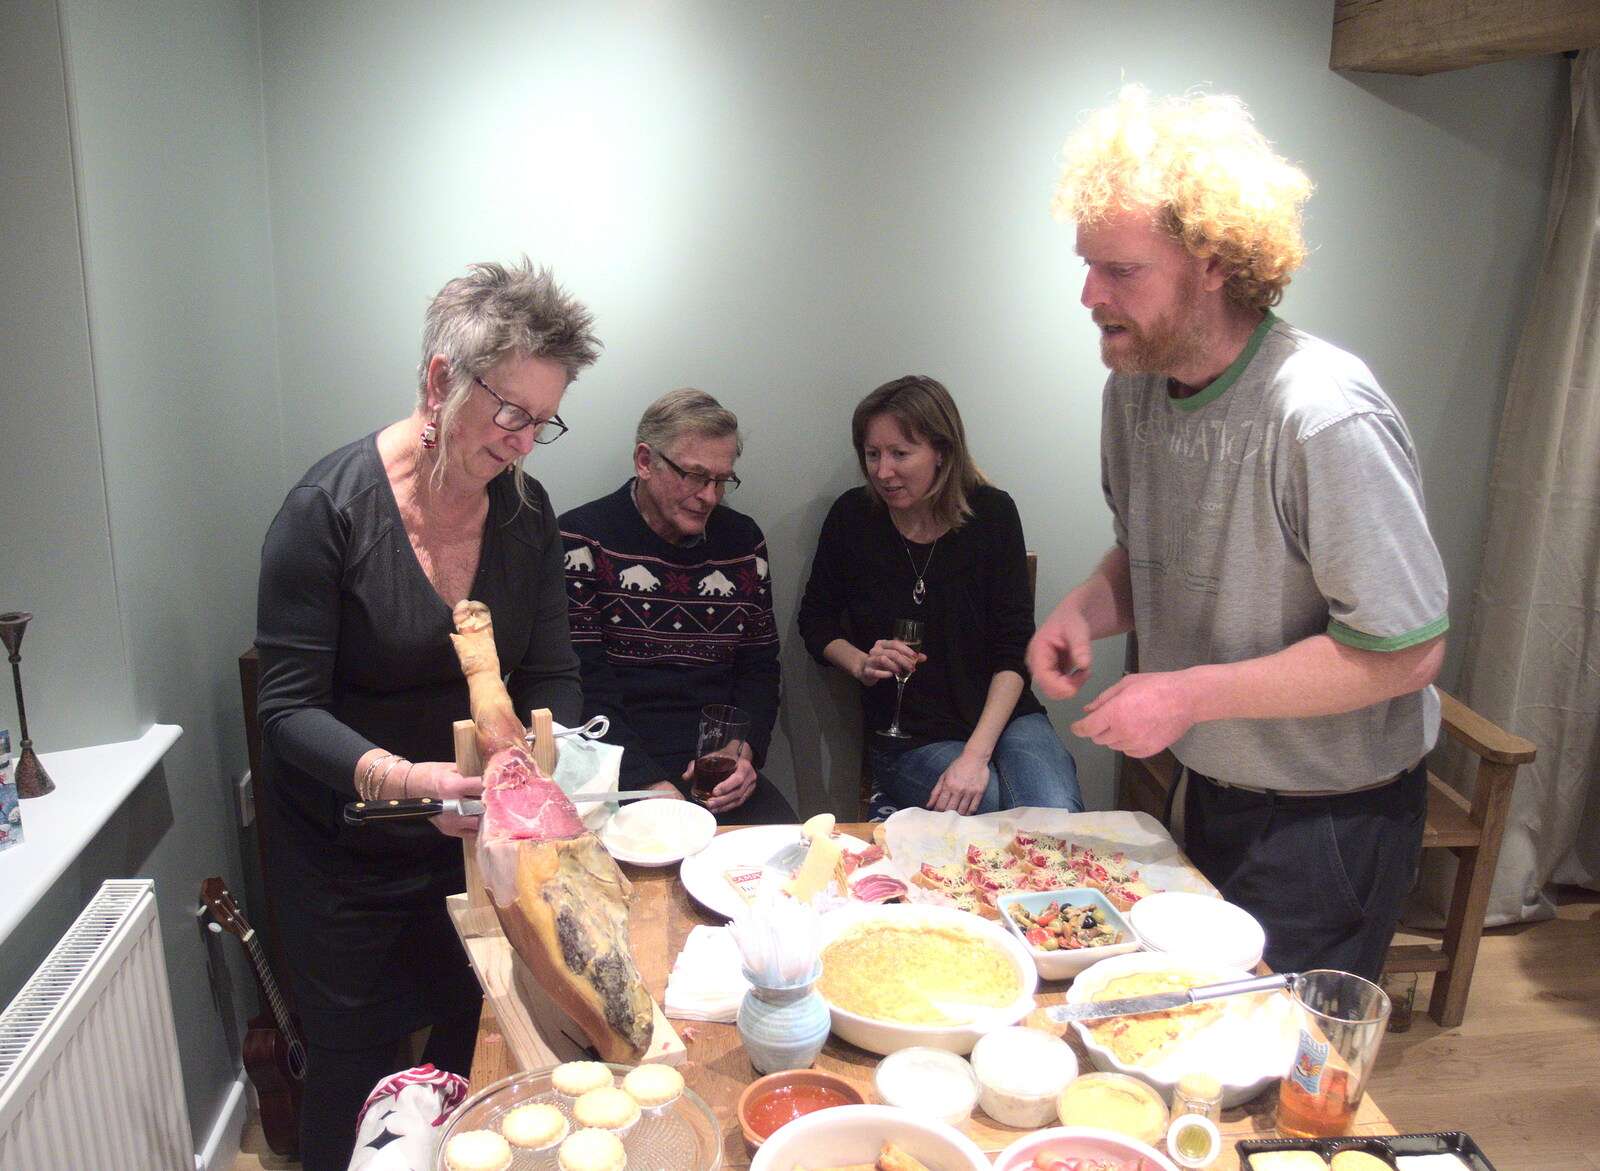 Sandie slices some Serrano ham as Wavy waits from Parties and Pantomimes, Suffolk and Norfolk - 14th December 2016